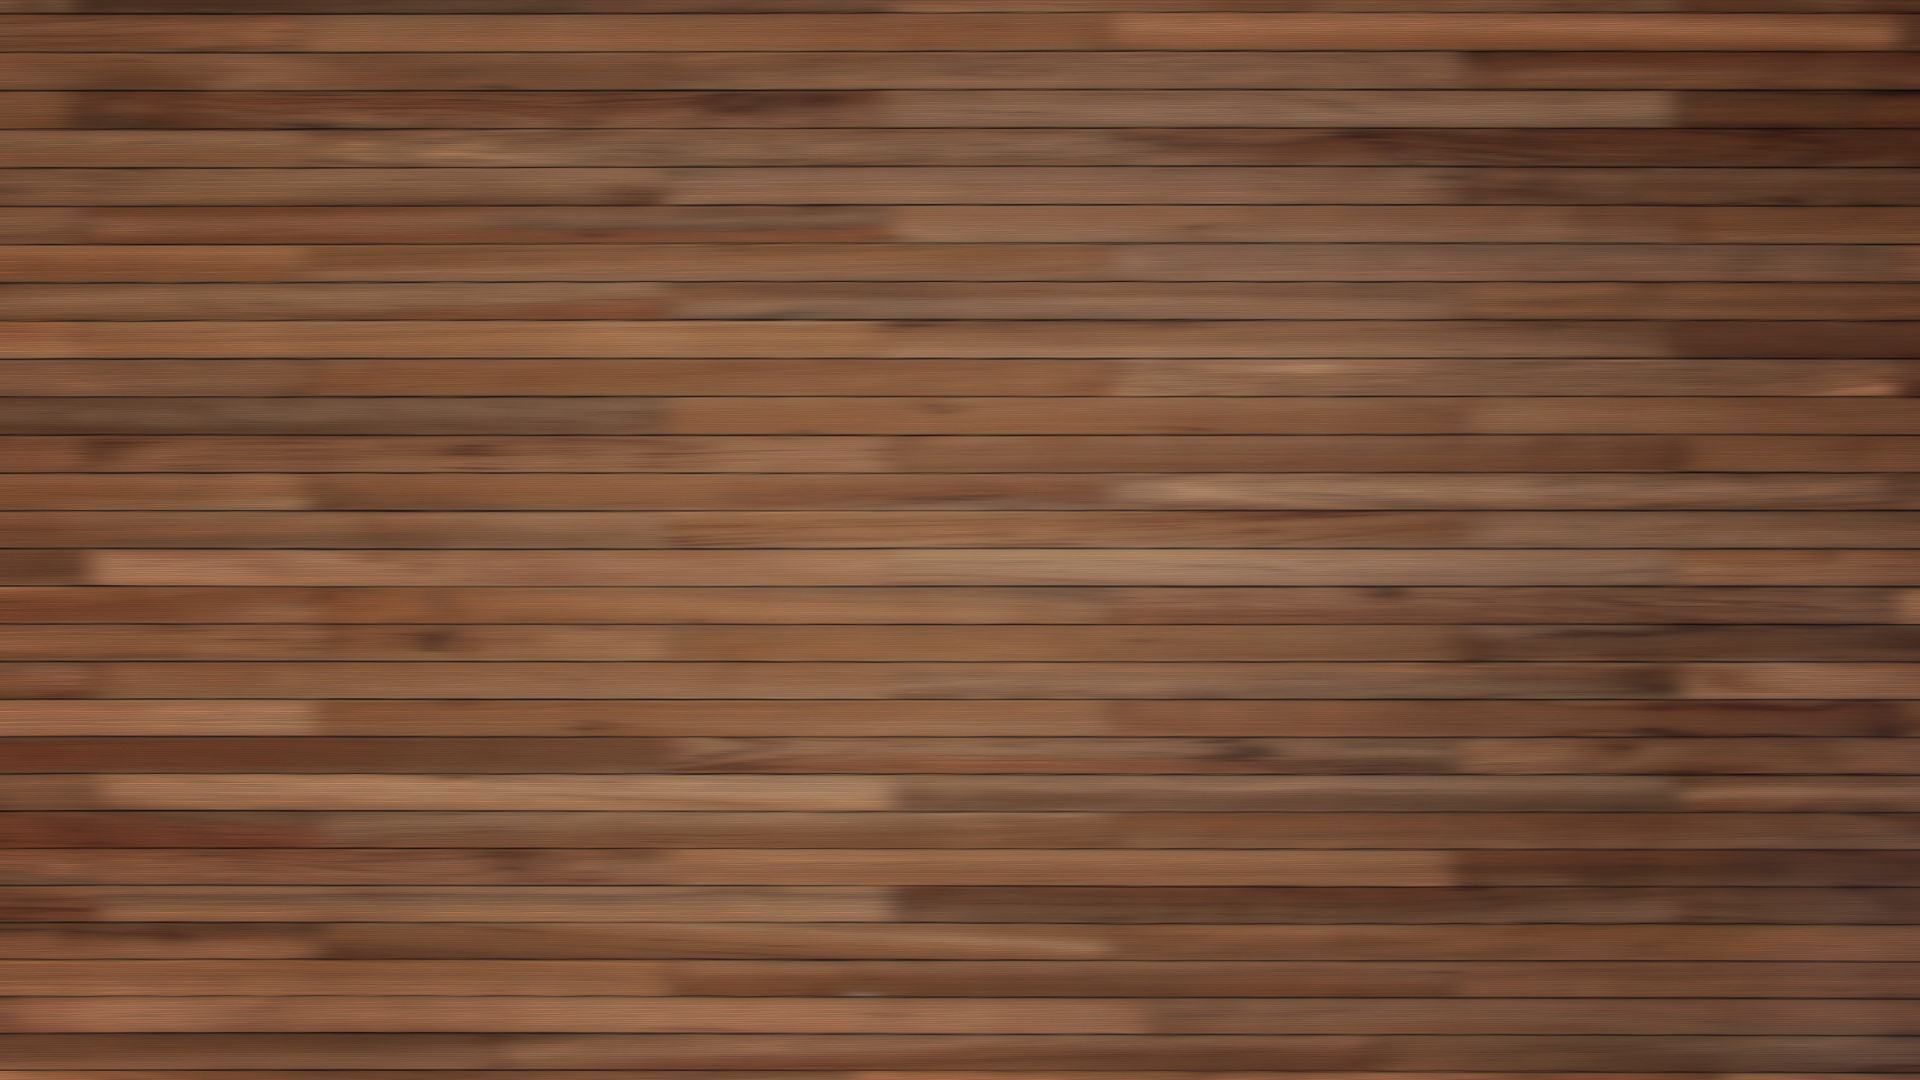 Brown Wooden Board With Brown Wooden Frame. Wallpaper in 1920x1080 Resolution